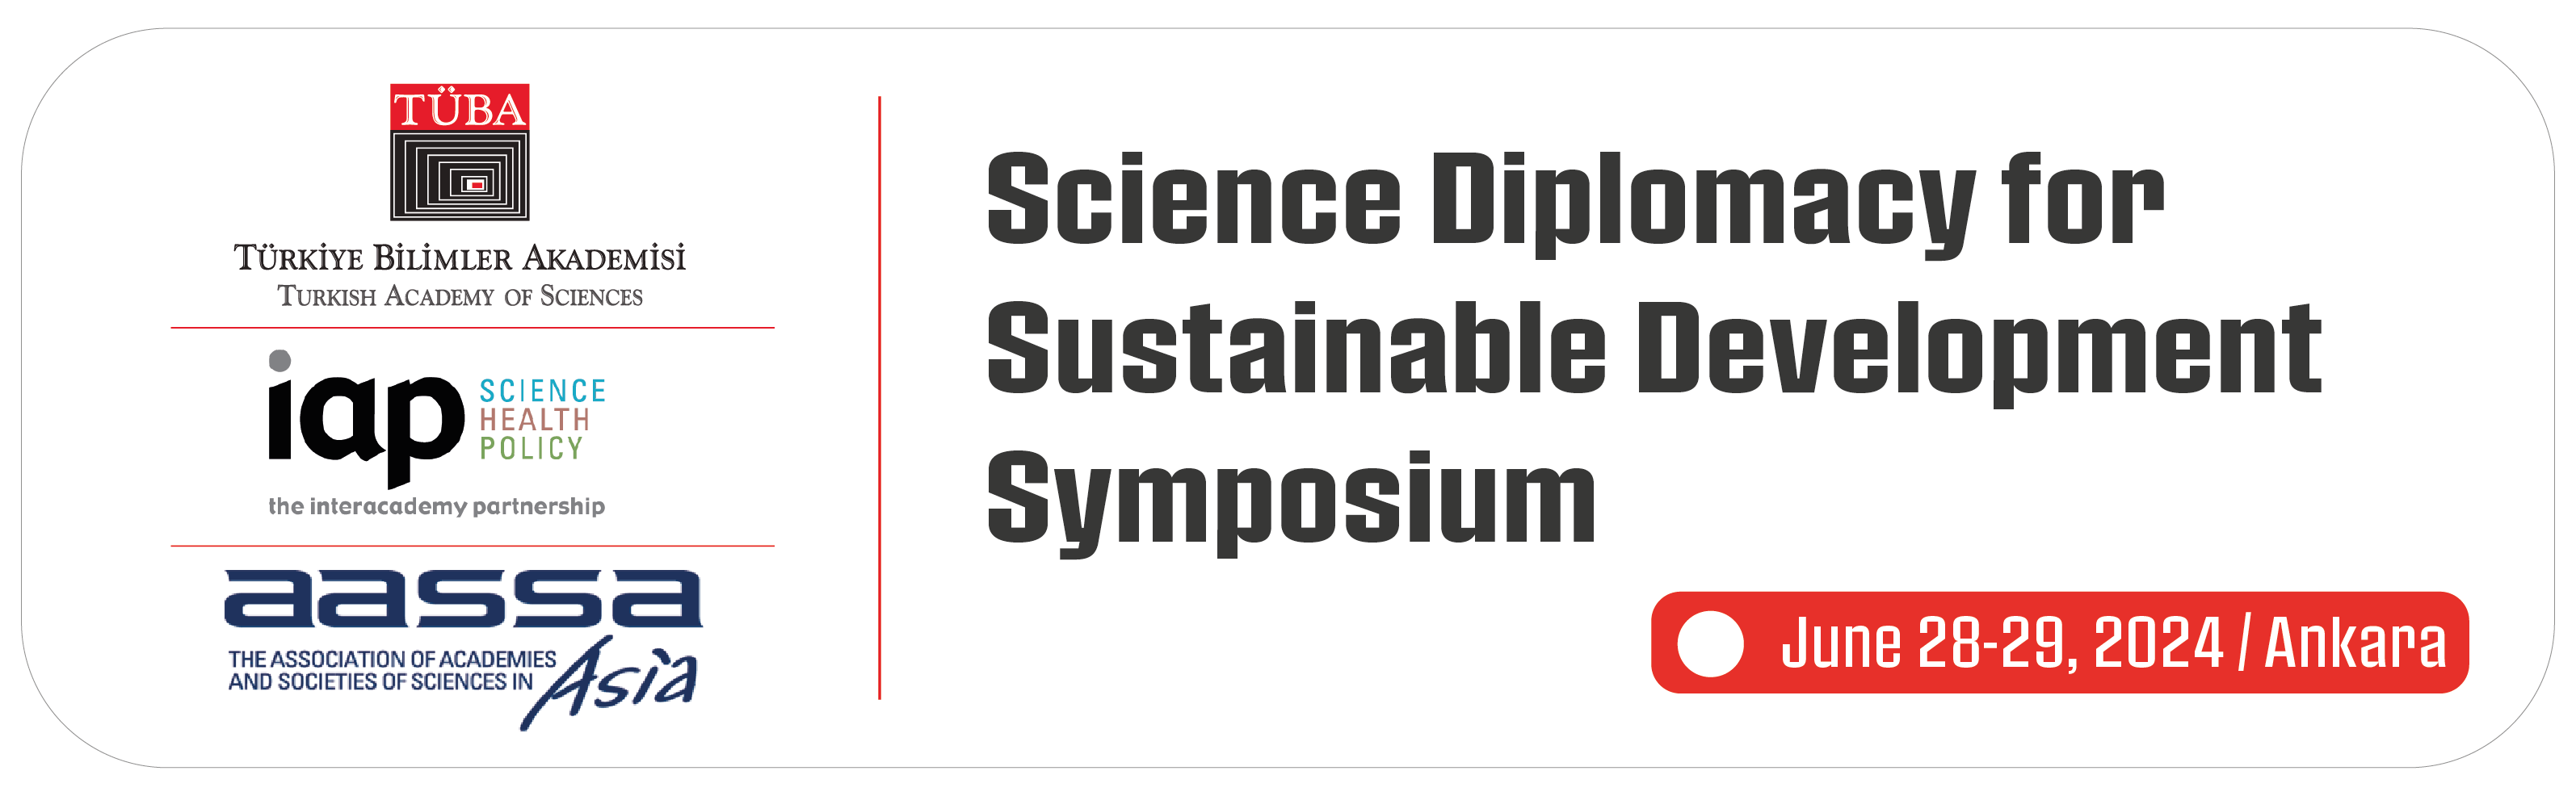 Science Diplomacy for Sustainable Development Symposium